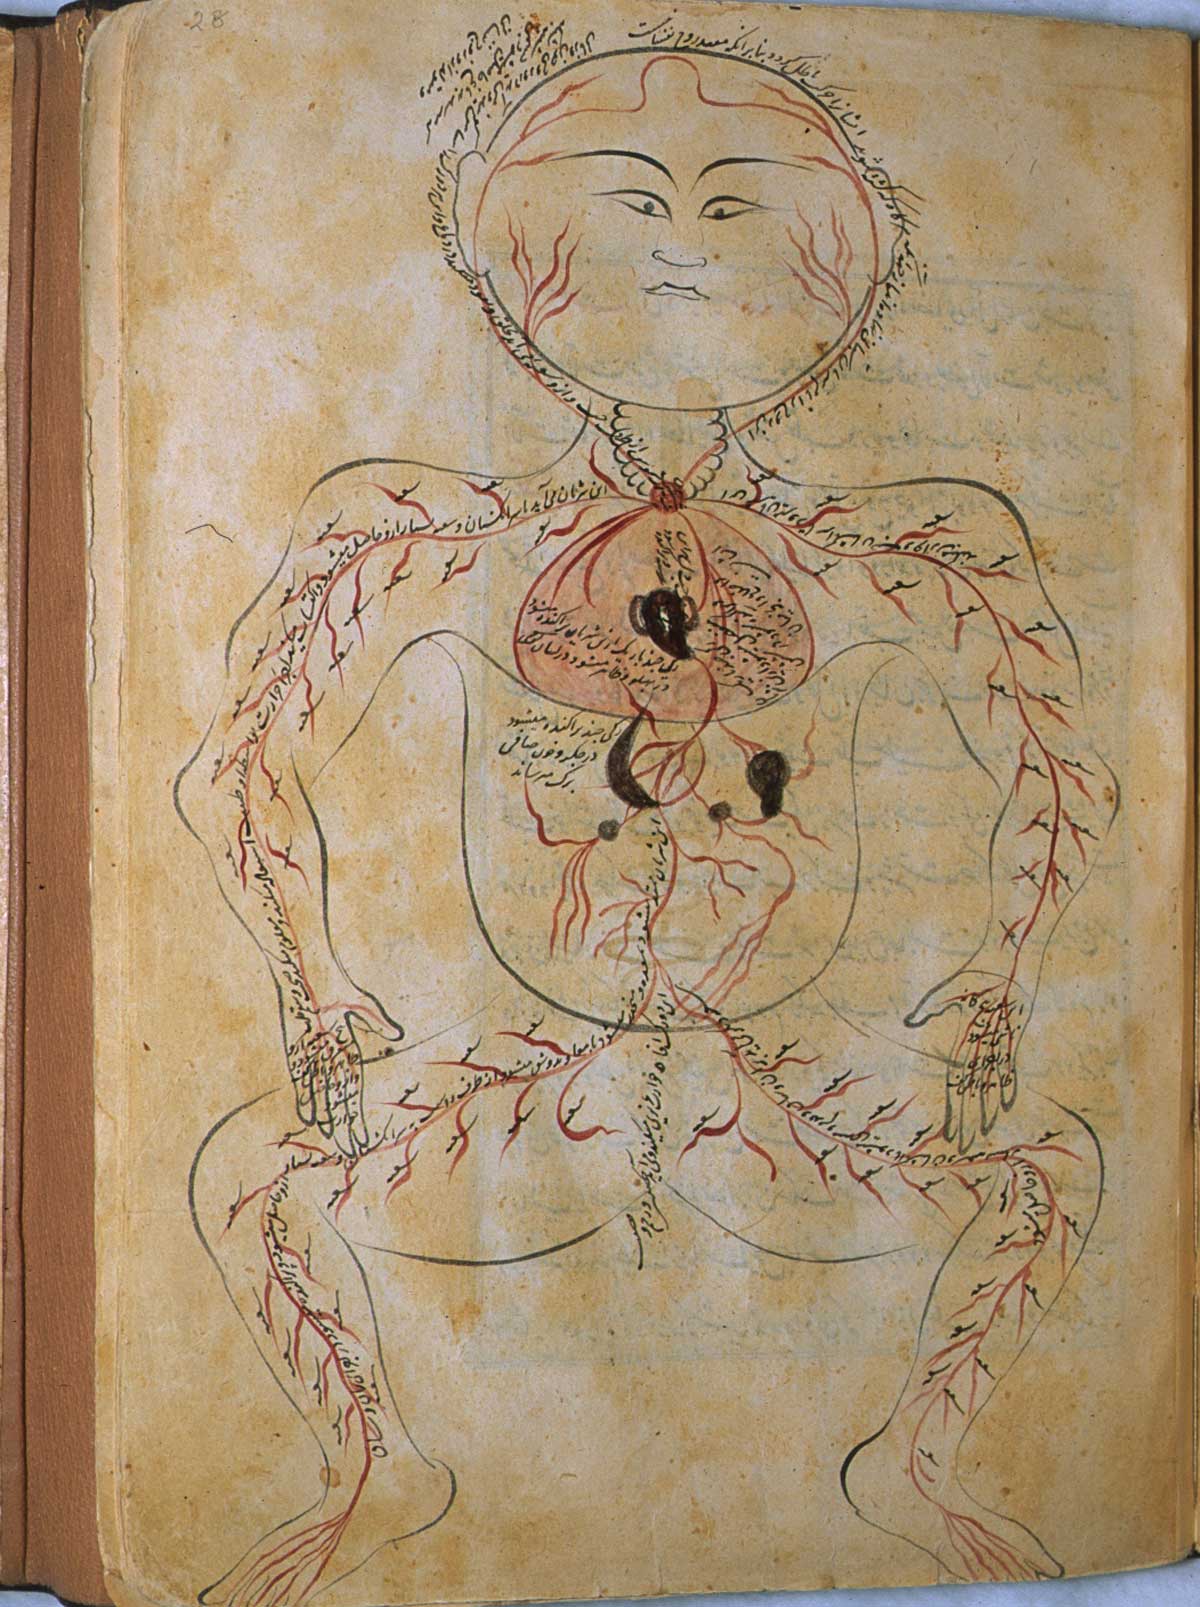 Folio 28a of Mansur ibn Ilyas' Tashrih-i badan-i insan, featuring the arterial figure, shown frontally with the internal organs indicated in opaque watercolours.